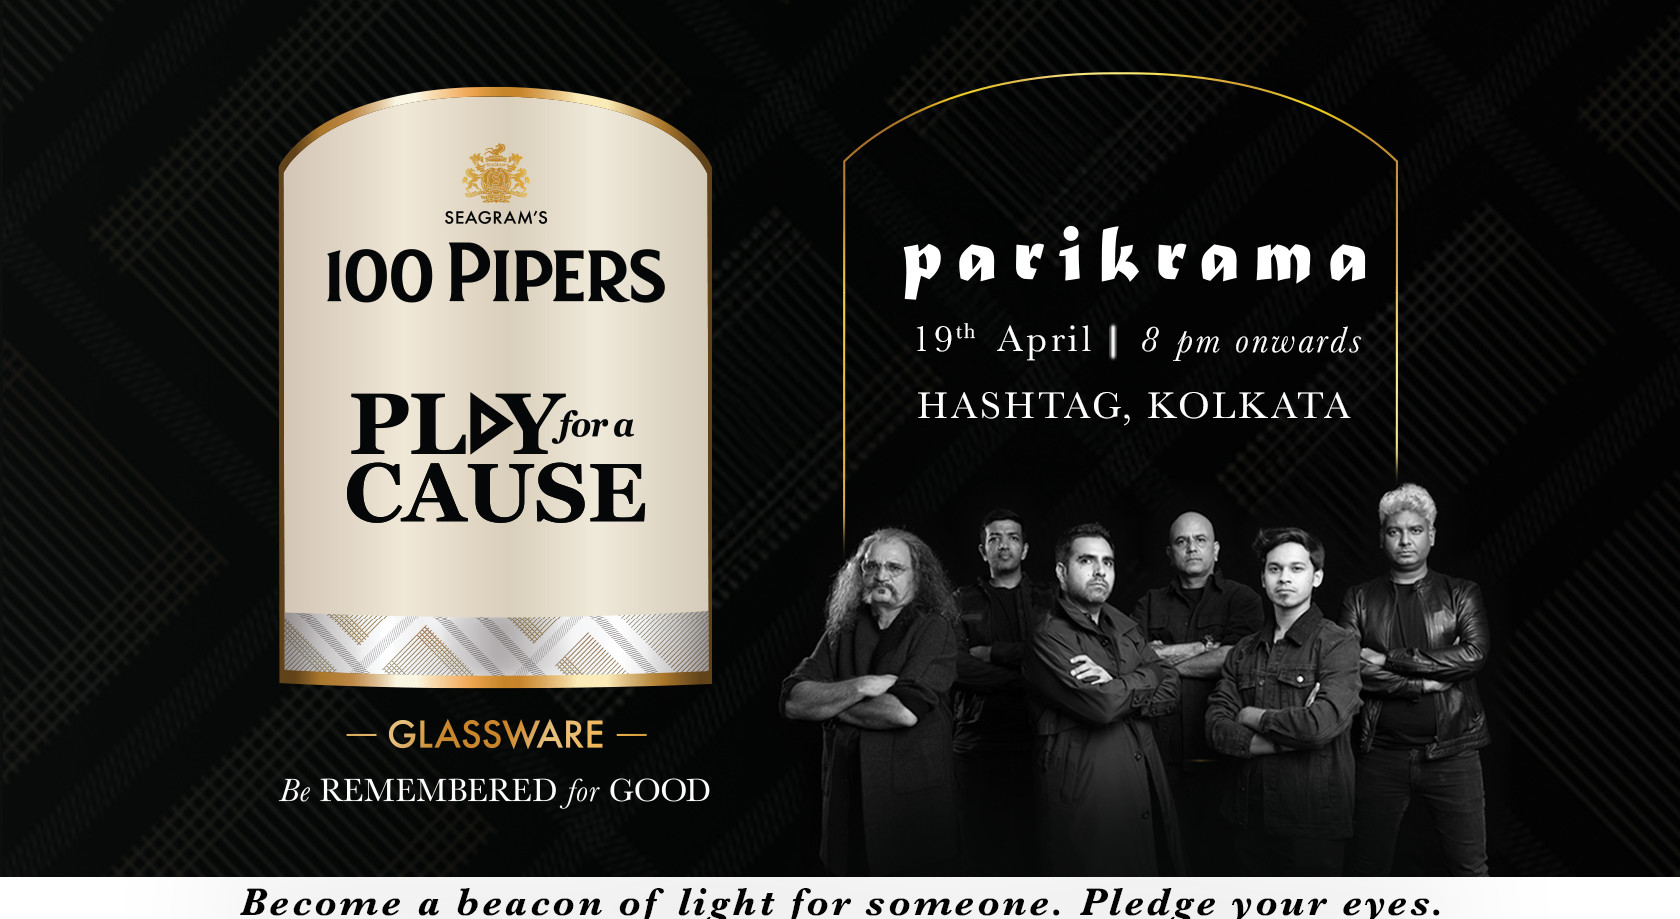 Goodness is now the Headline Act in Nagpur with Seagramâ€™s 100 Pipers  â€˜Play for a Causeâ€™ on 29 Nov 2019 - The Live Nagpur